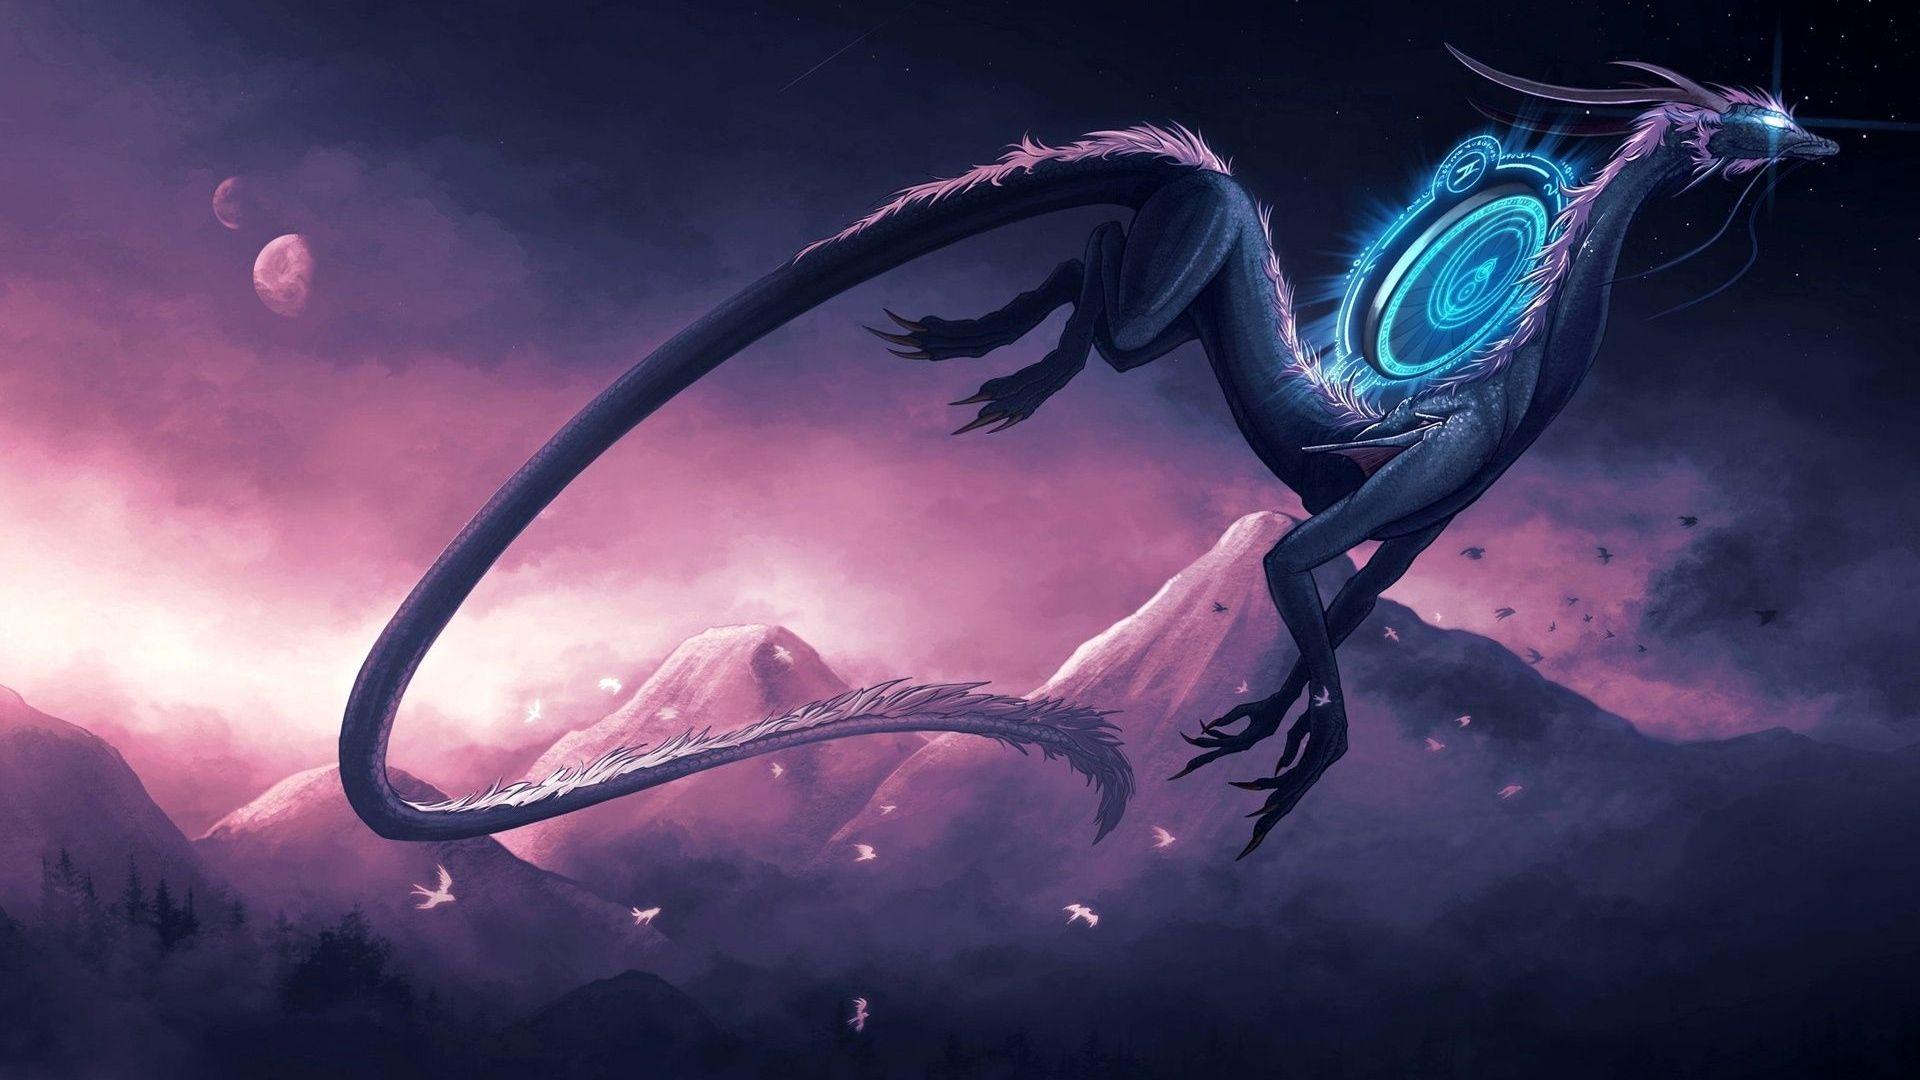 Galaxy Dragon Wallpapers Top Free Galaxy Dragon Backgrounds